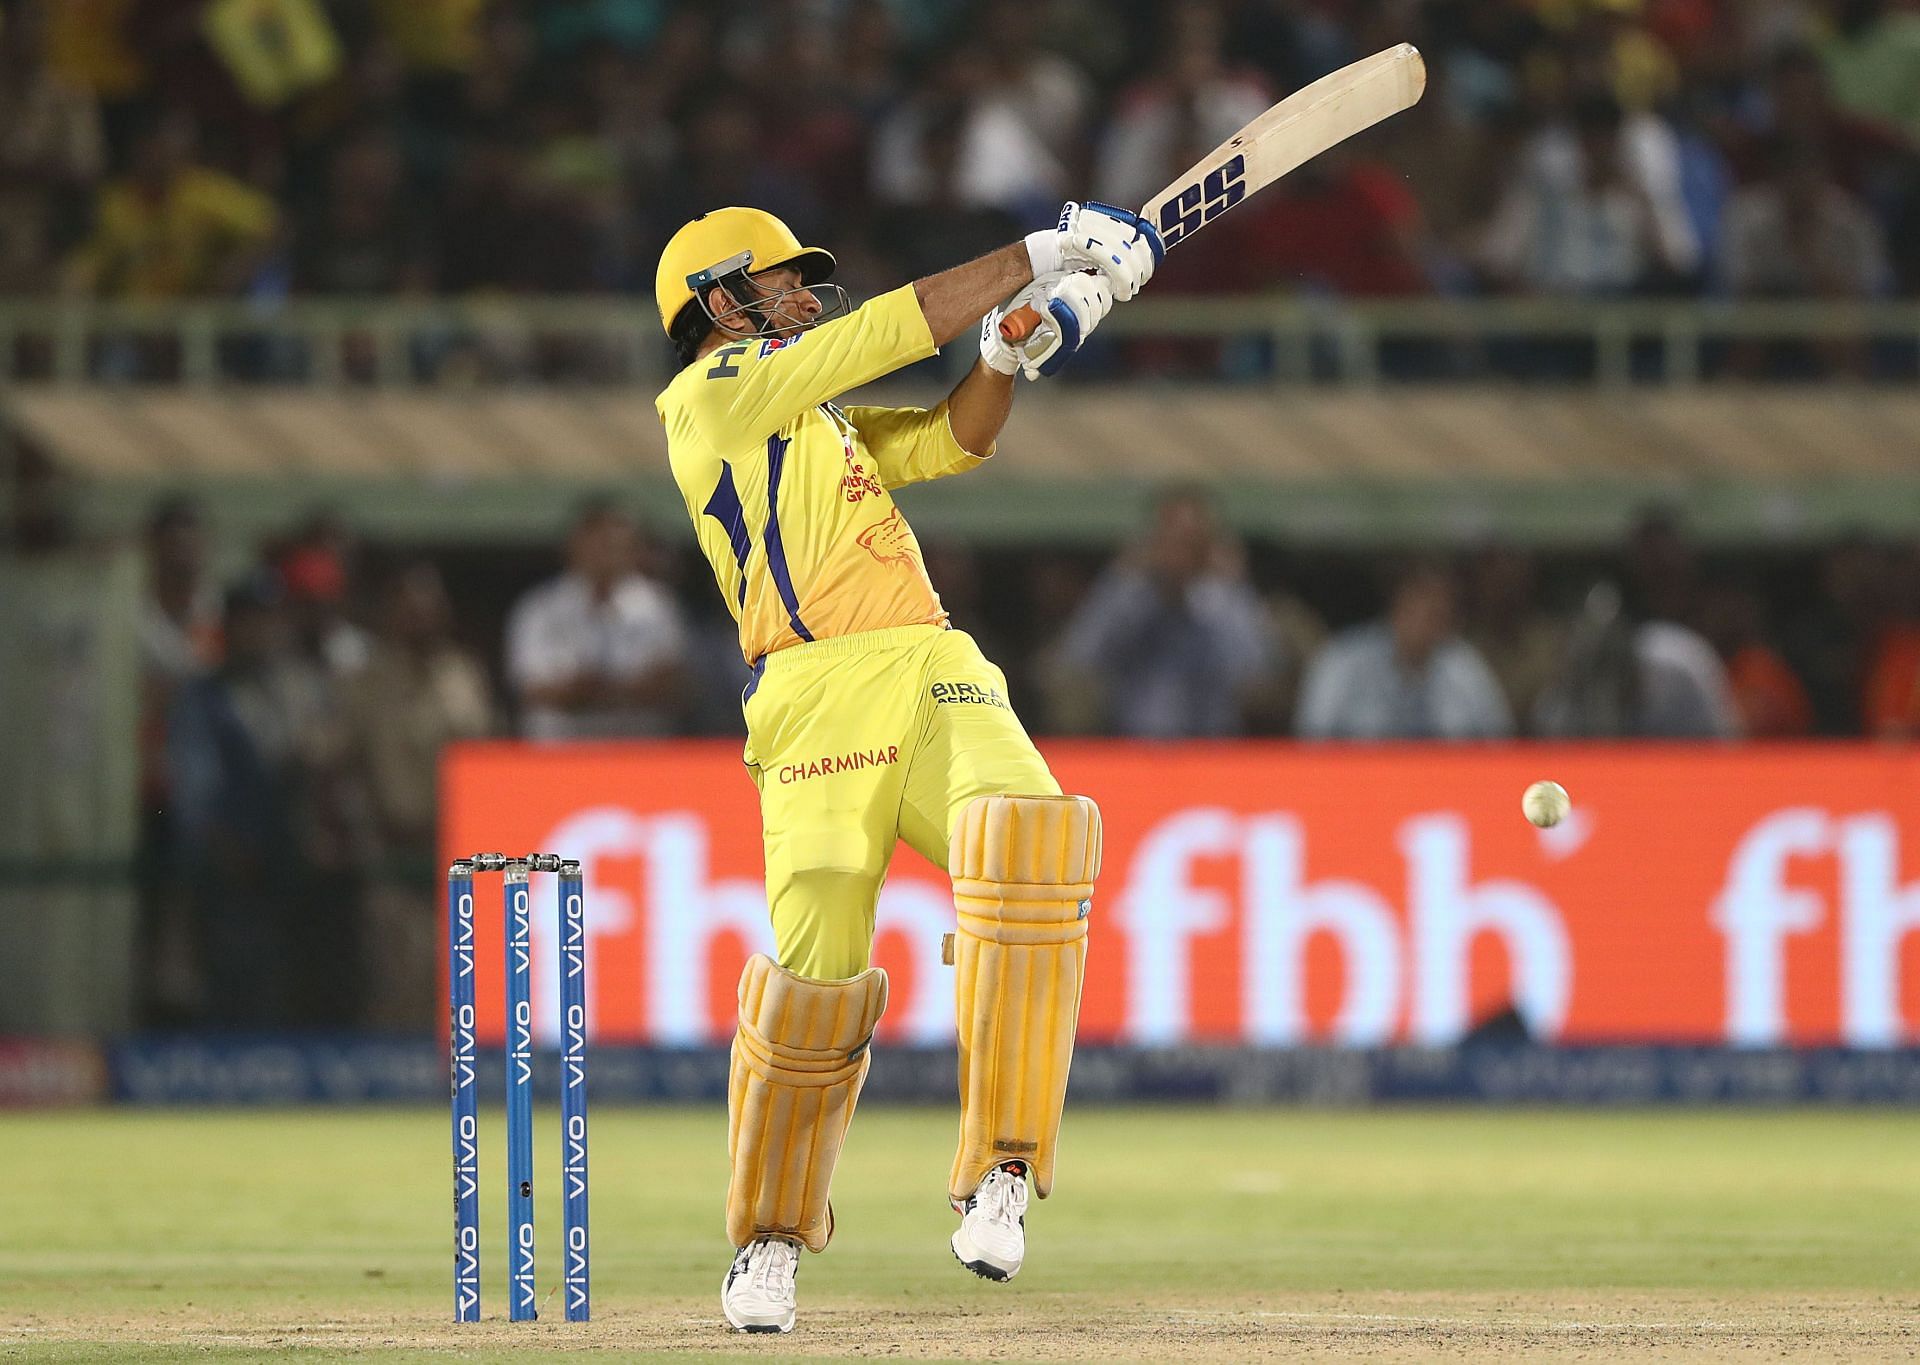 MS Dhoni batting in the IPL. Pic: Getty Images